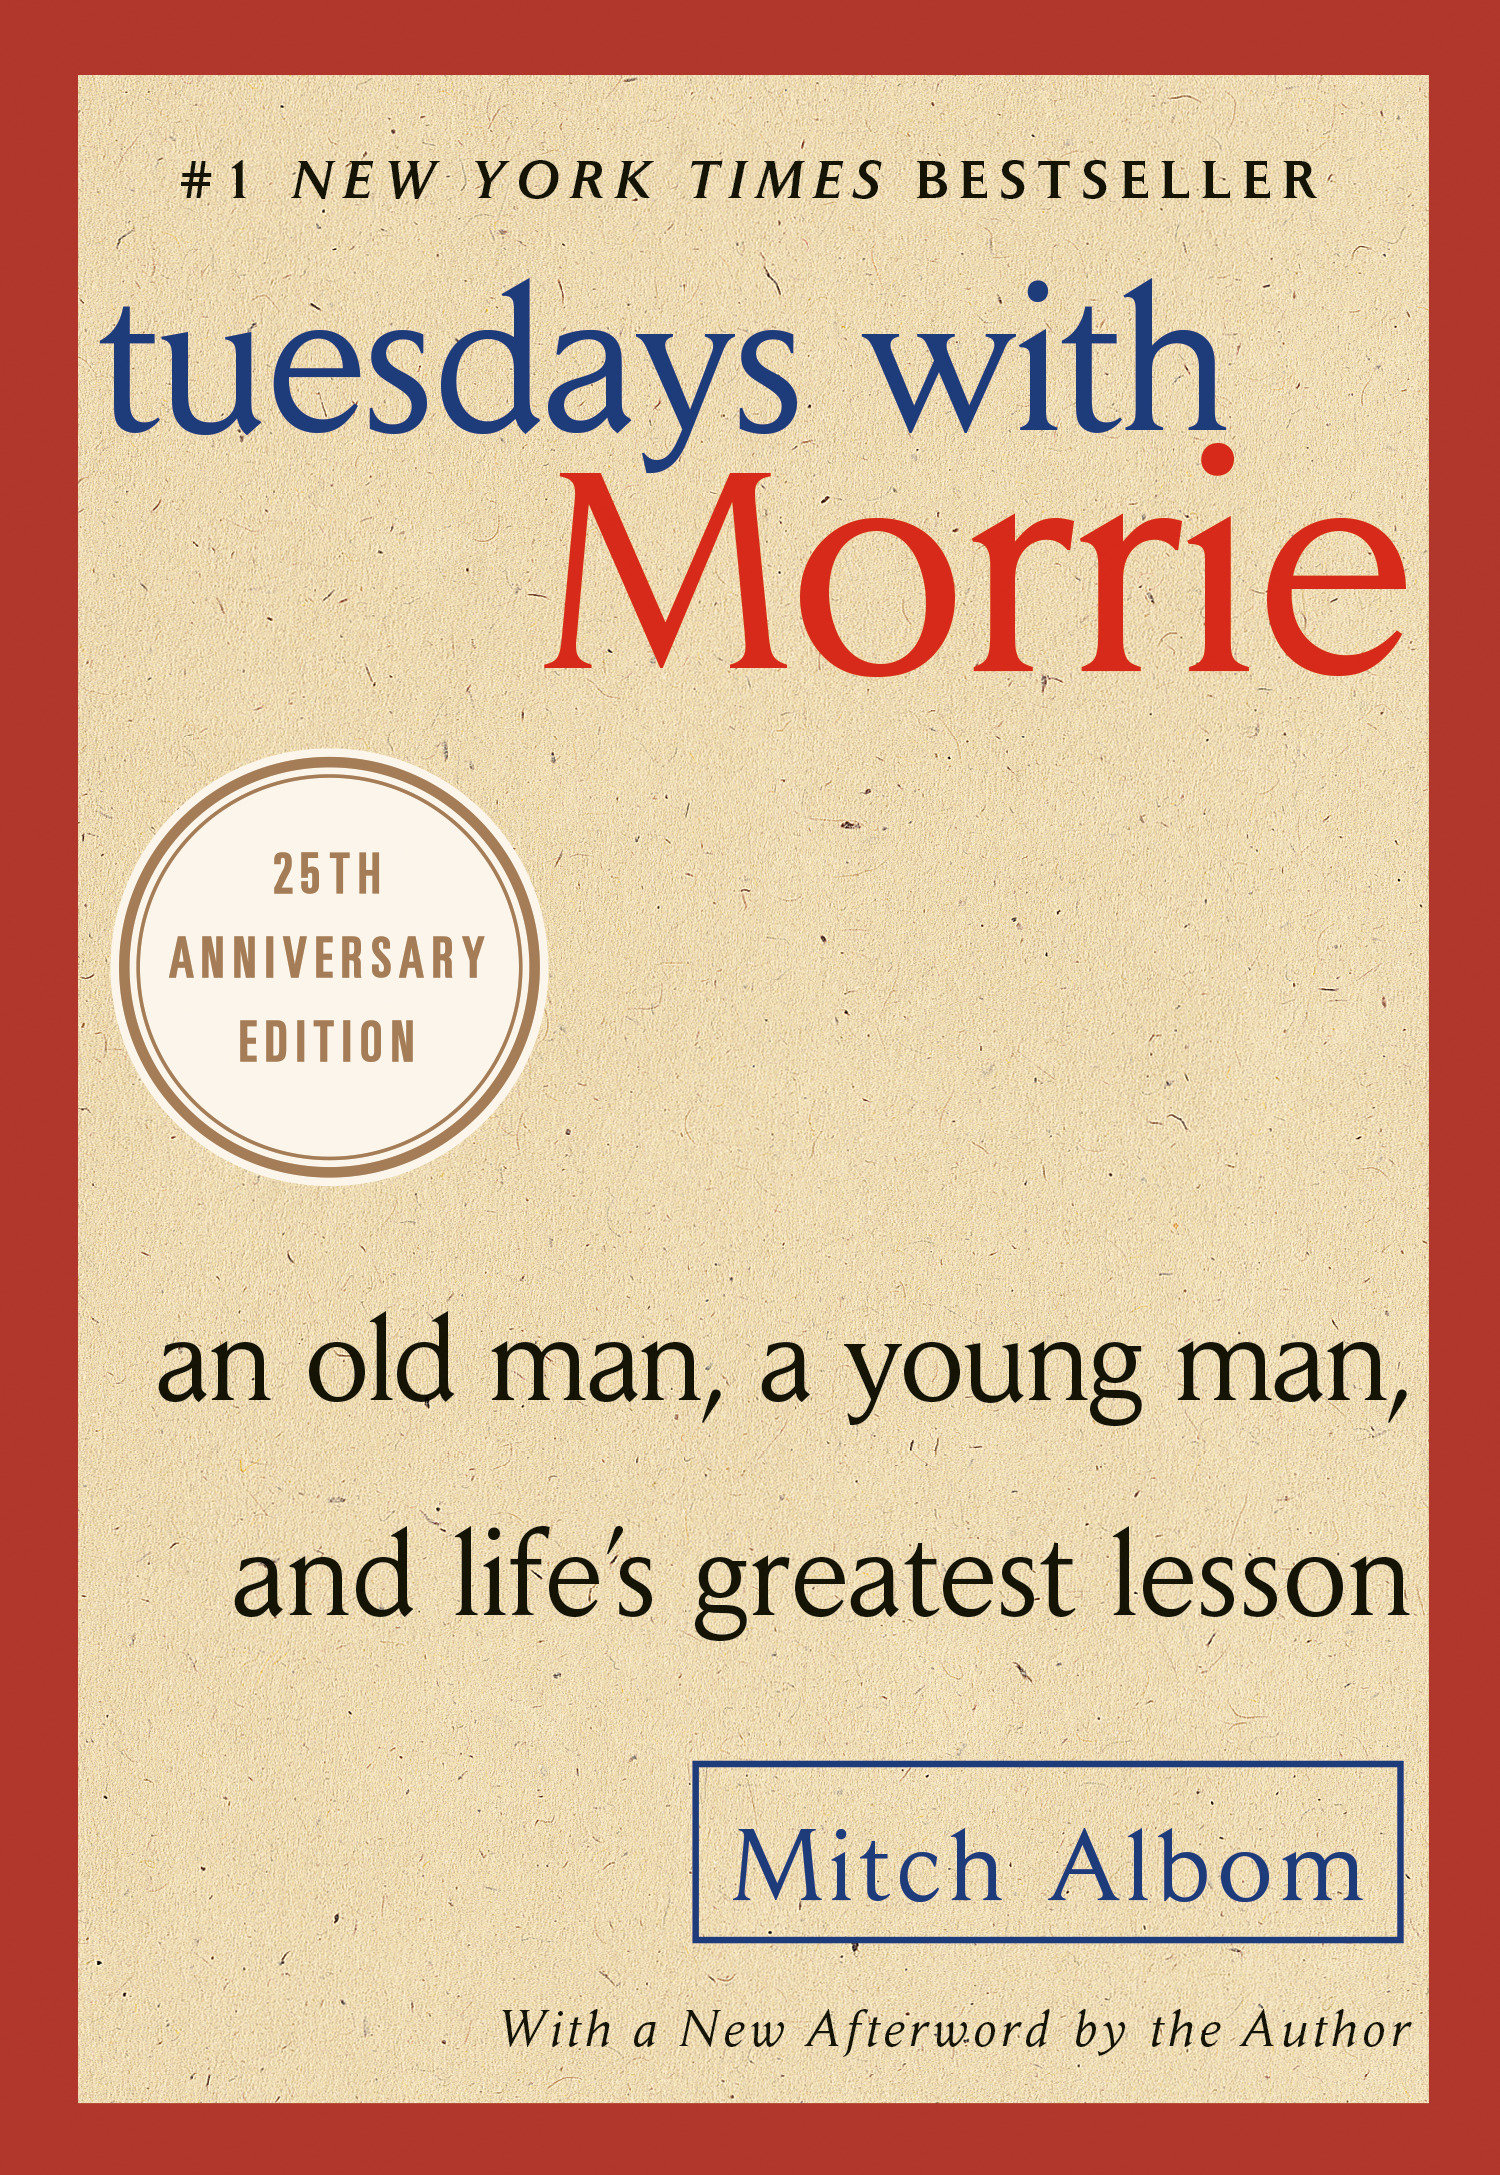 Umschlagbild für Tuesdays with Morrie [electronic resource] : An Old Man, a Young Man, and Life's Greatest Lesson, 25th Anniversary Edition